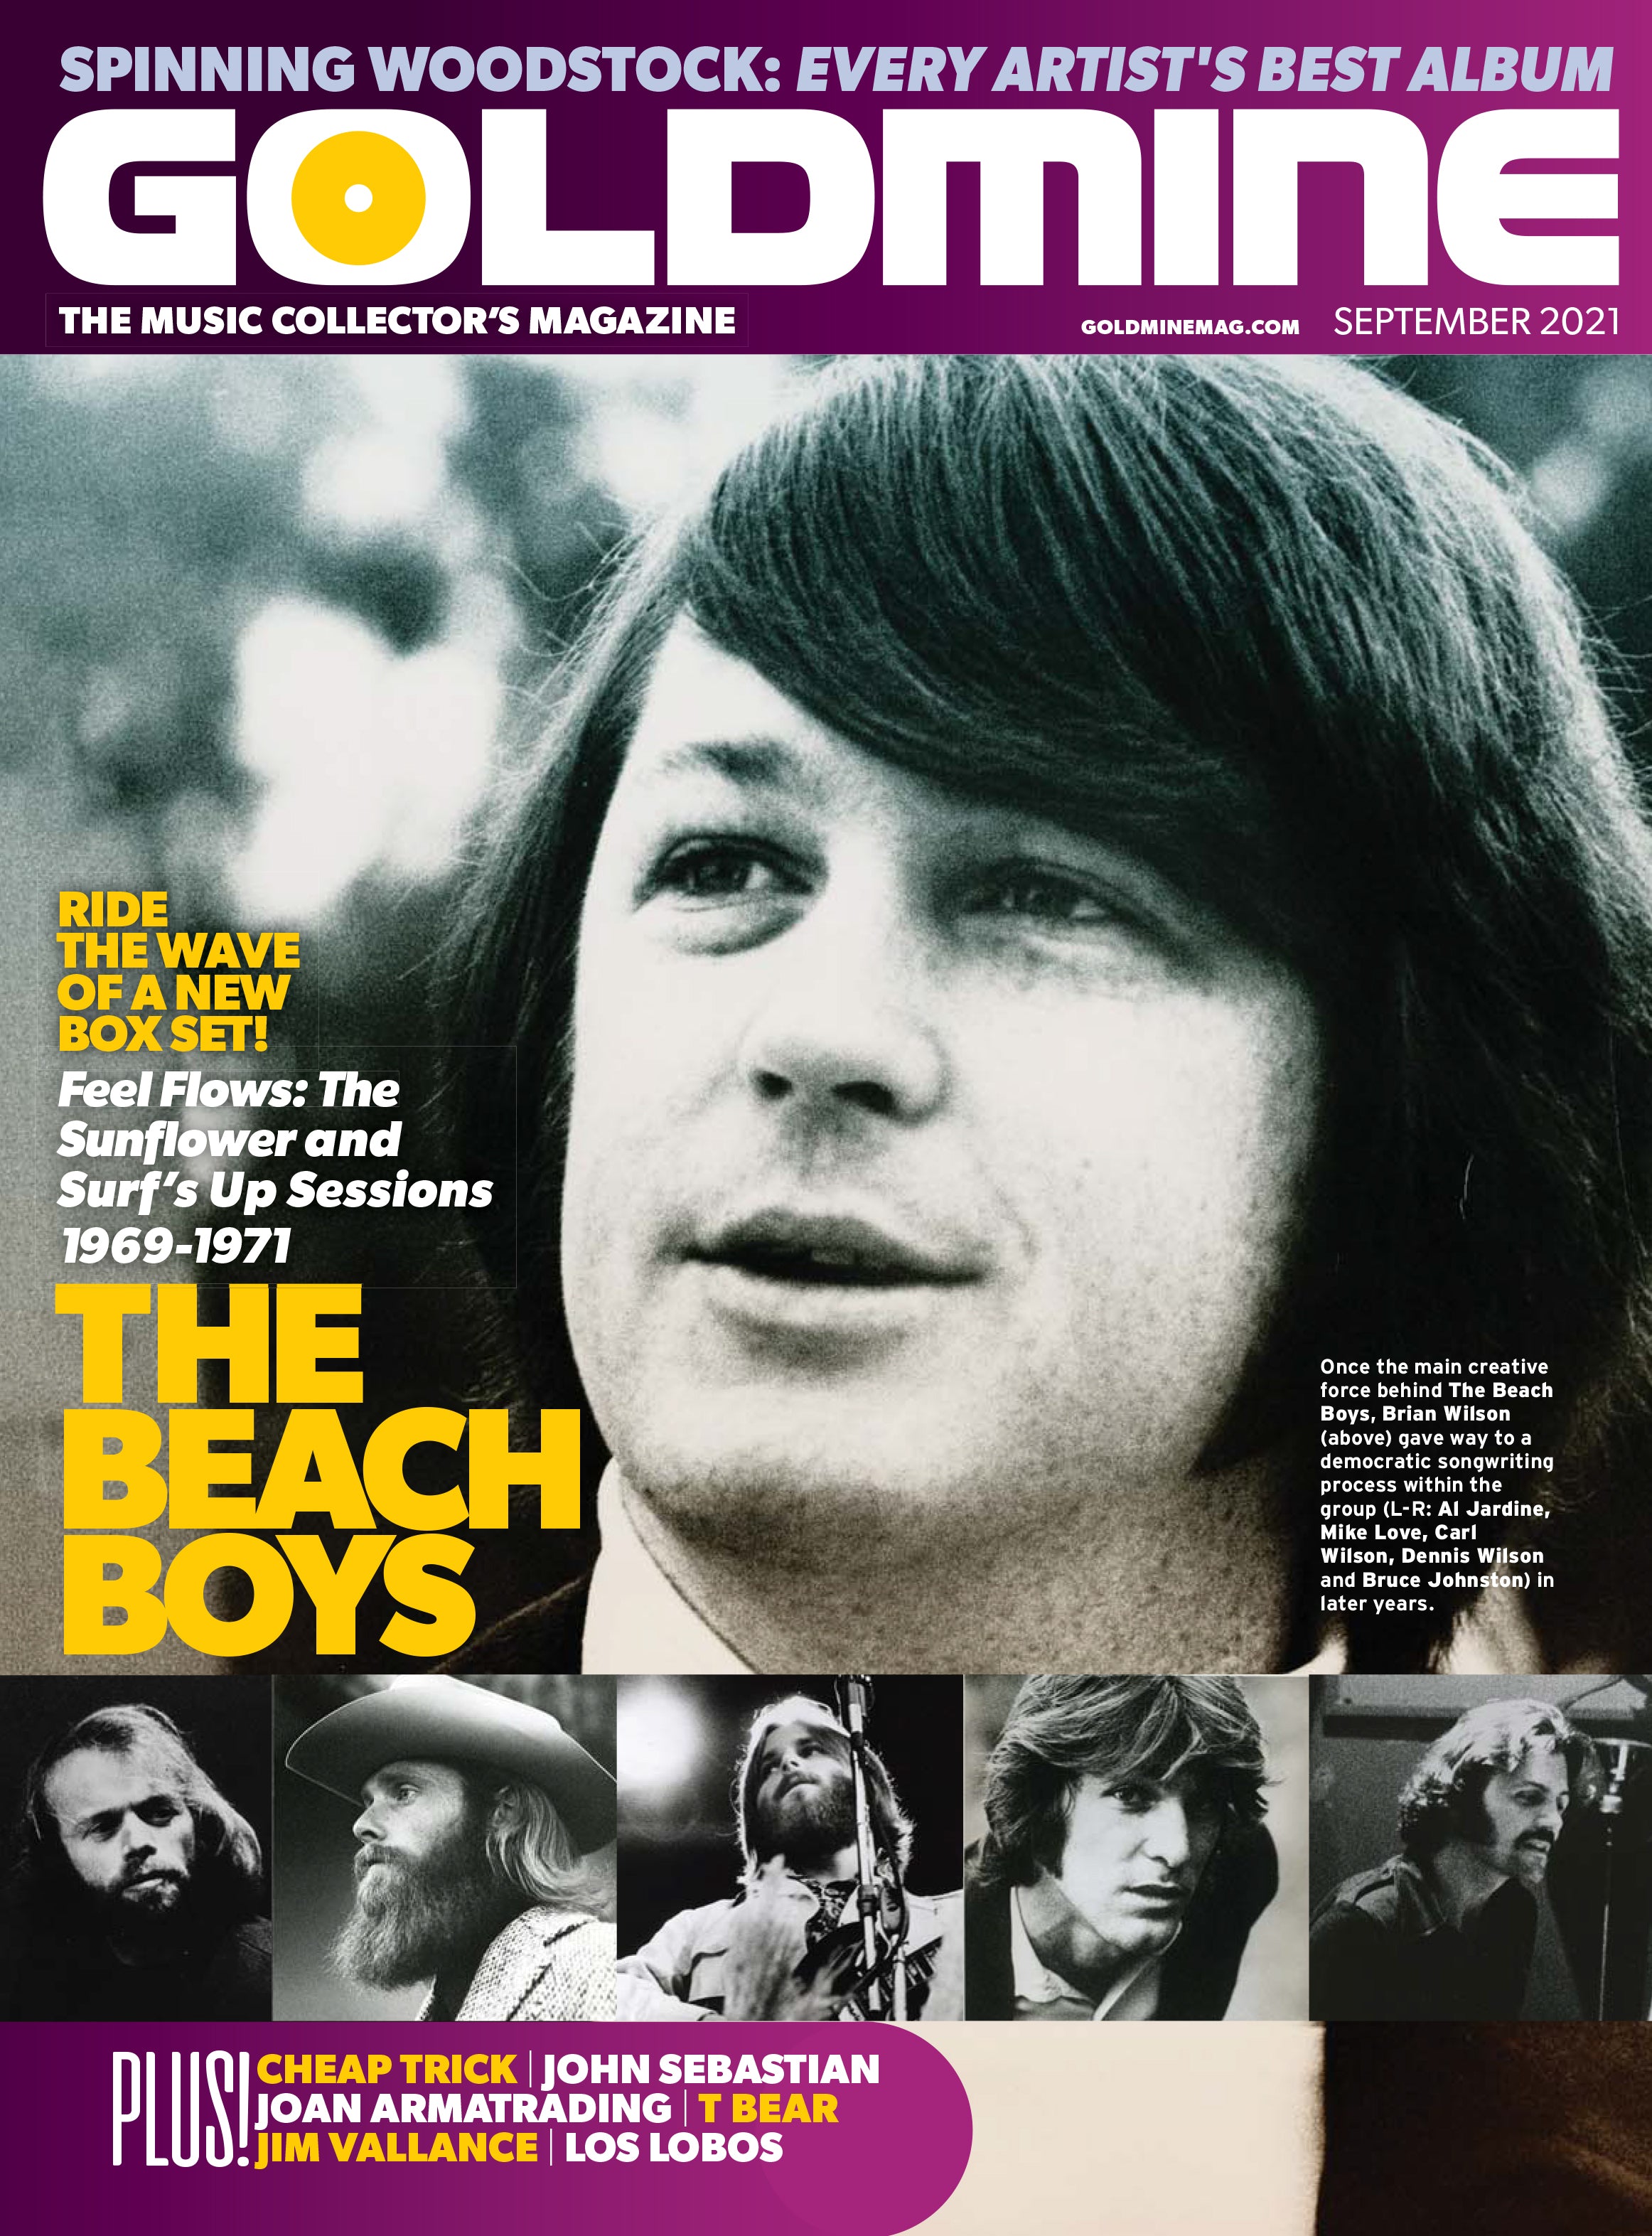 GOLDMINE MAGAZINE: SEPTEMBER 2021 ISSUE FEATURING THE BEACH BOYS